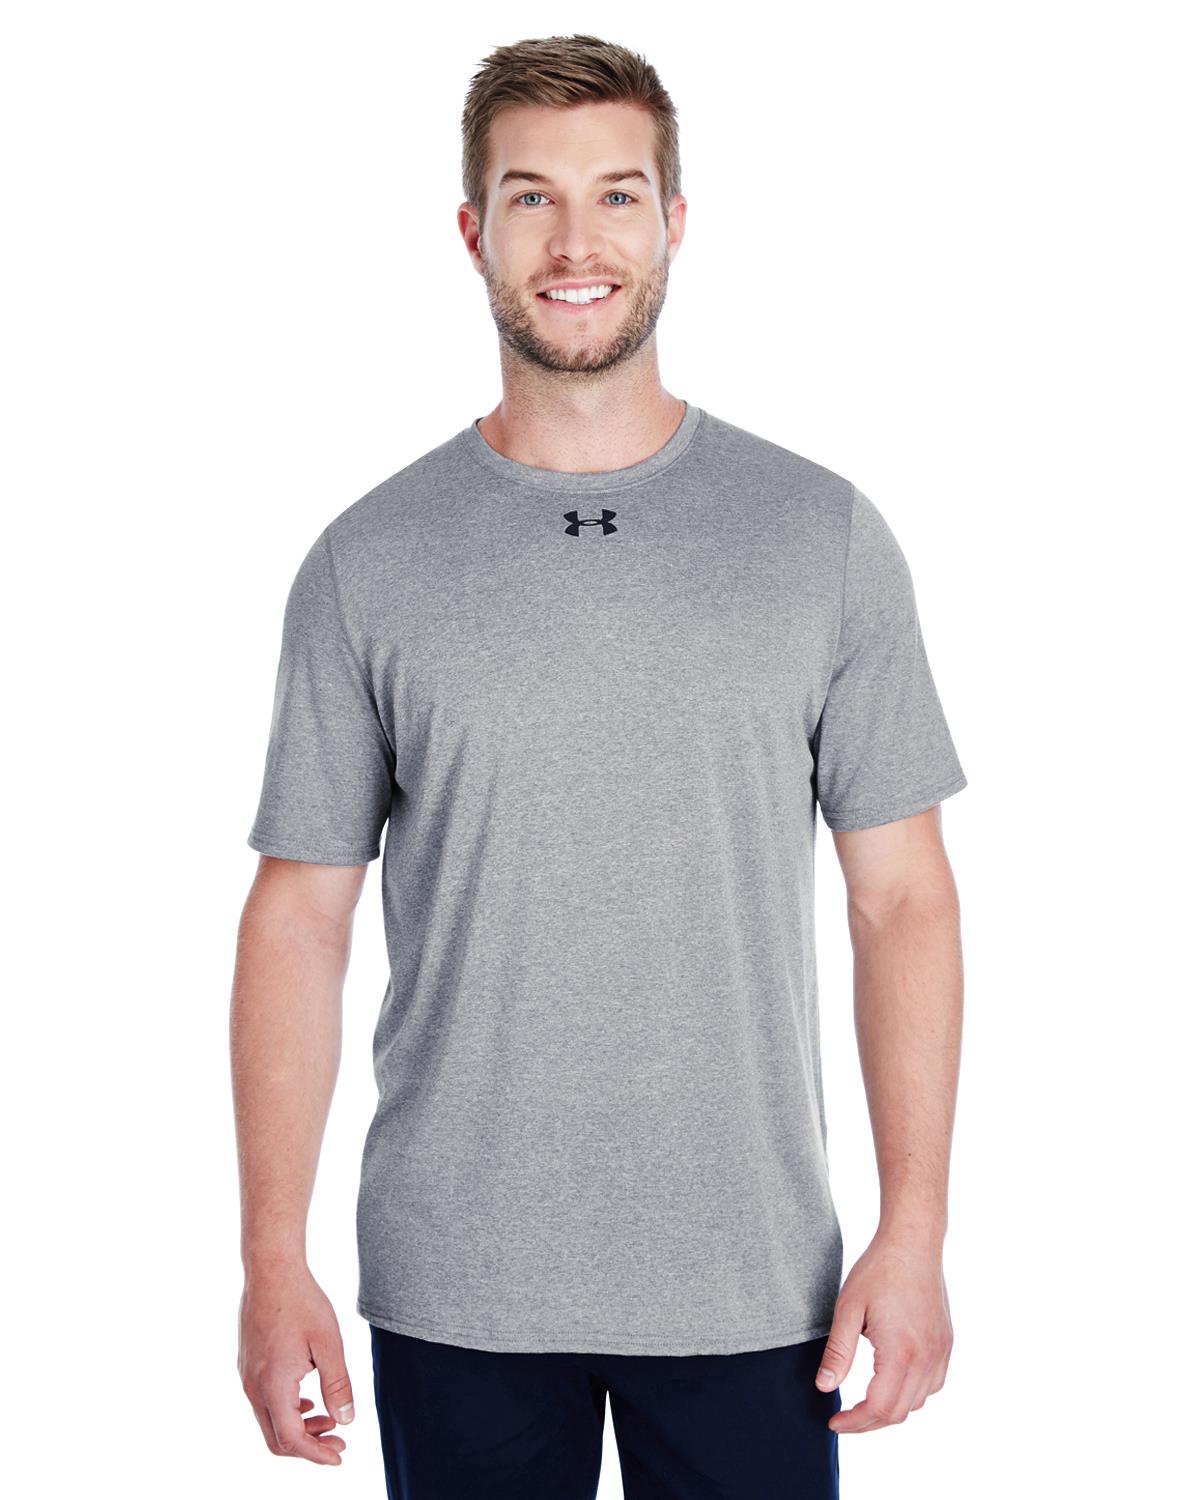 Size Chart for Under Armour 1305775 Mens Locker T-Shirt